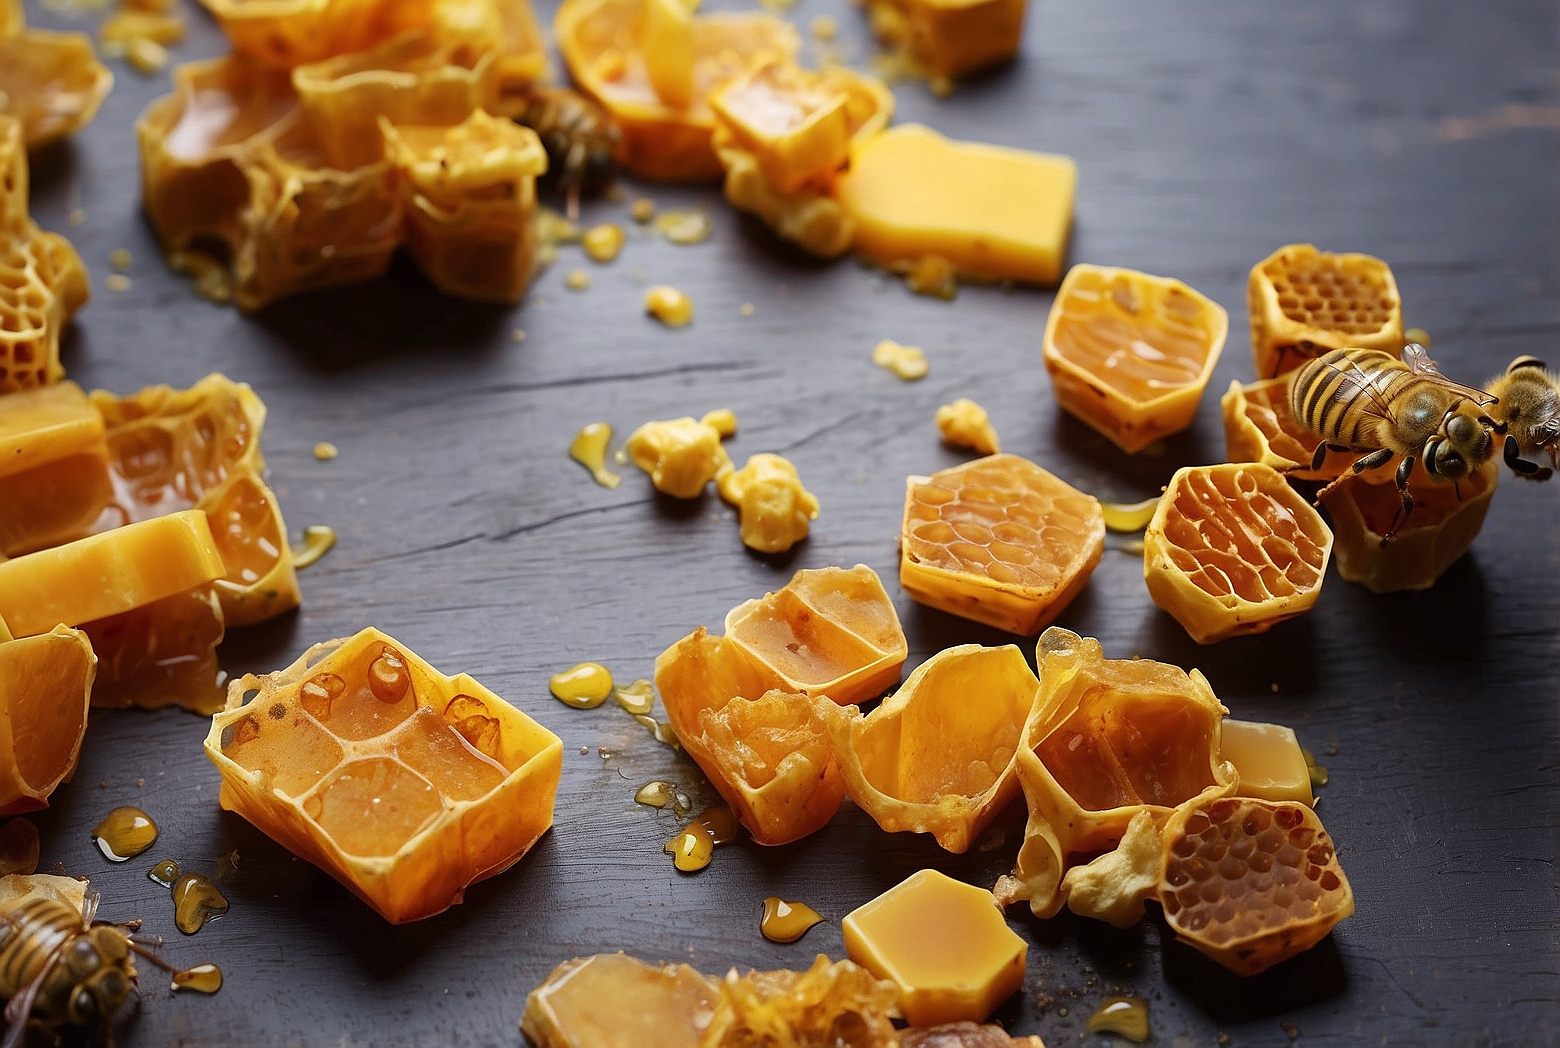 Can You Eat Beeswax Honeycomb?